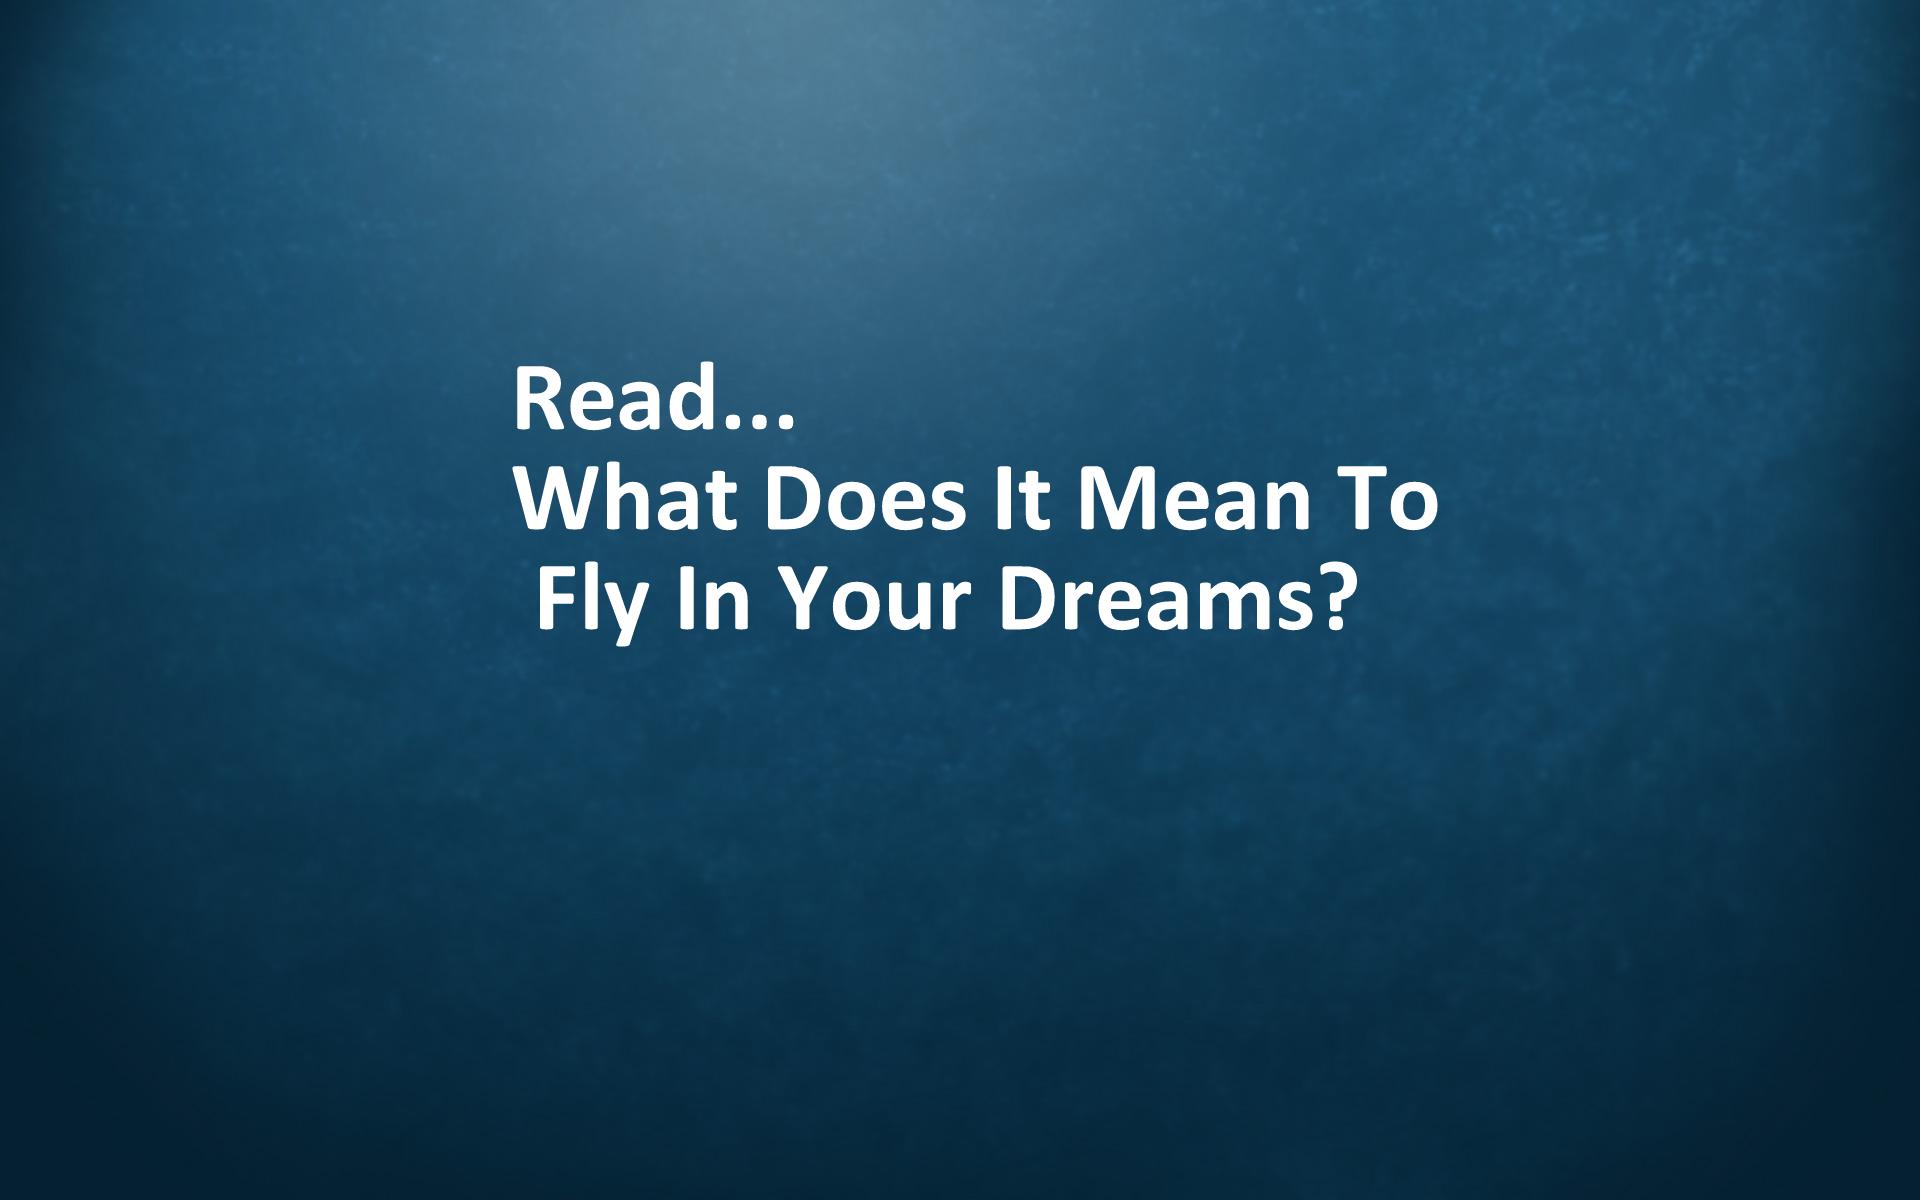 Dream about flying